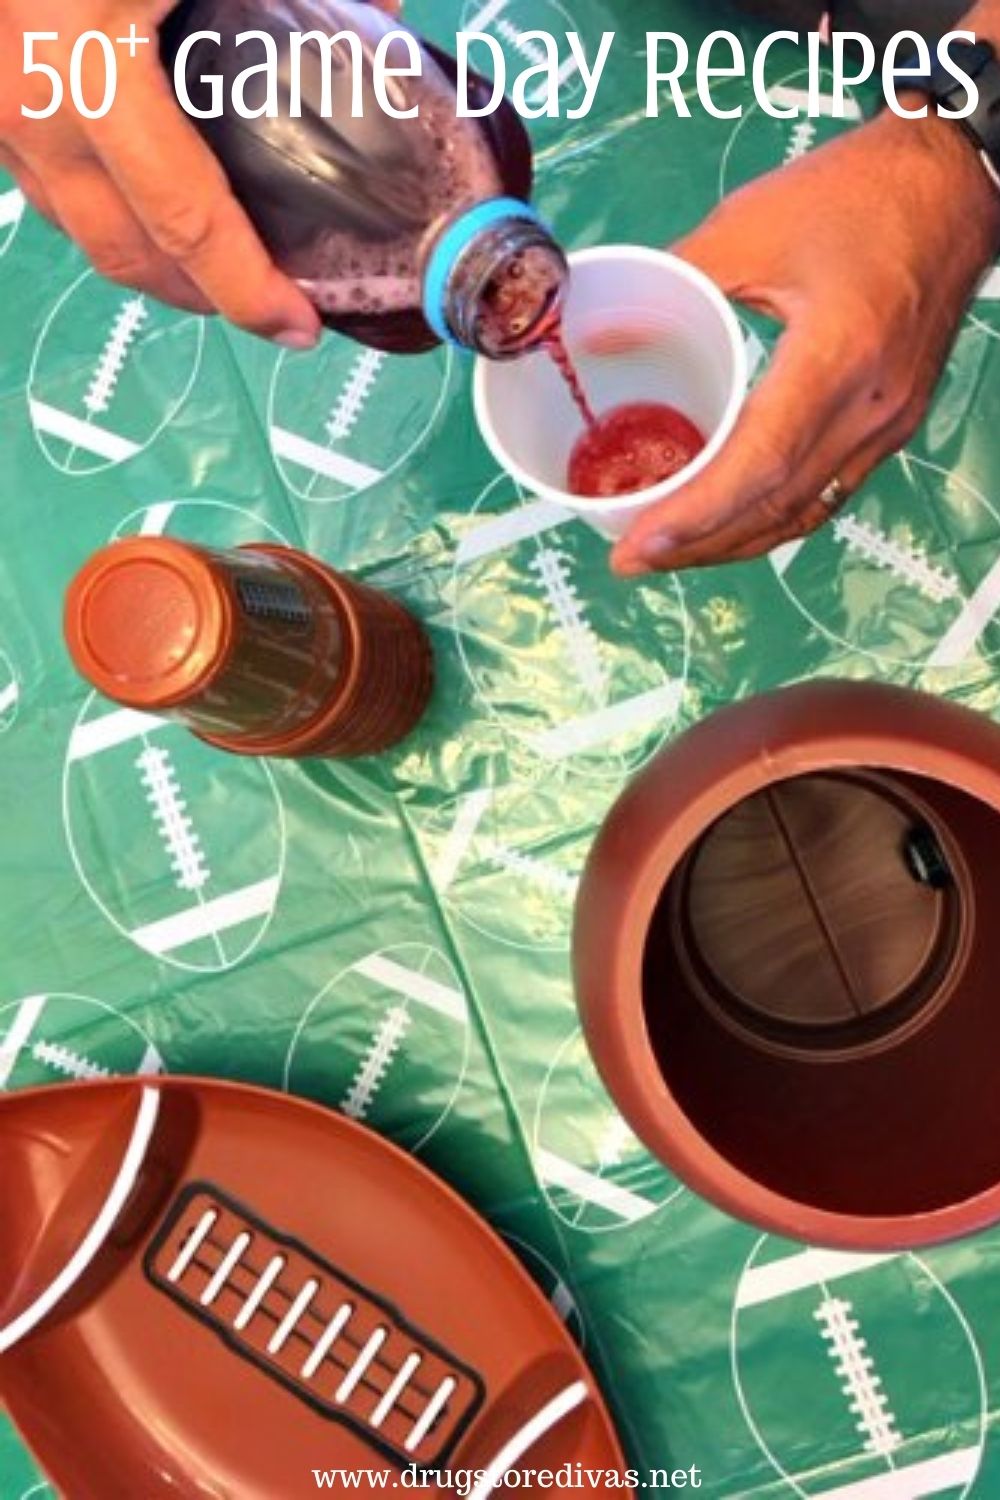 A hand pouring drinks over a football table cloth with the words 